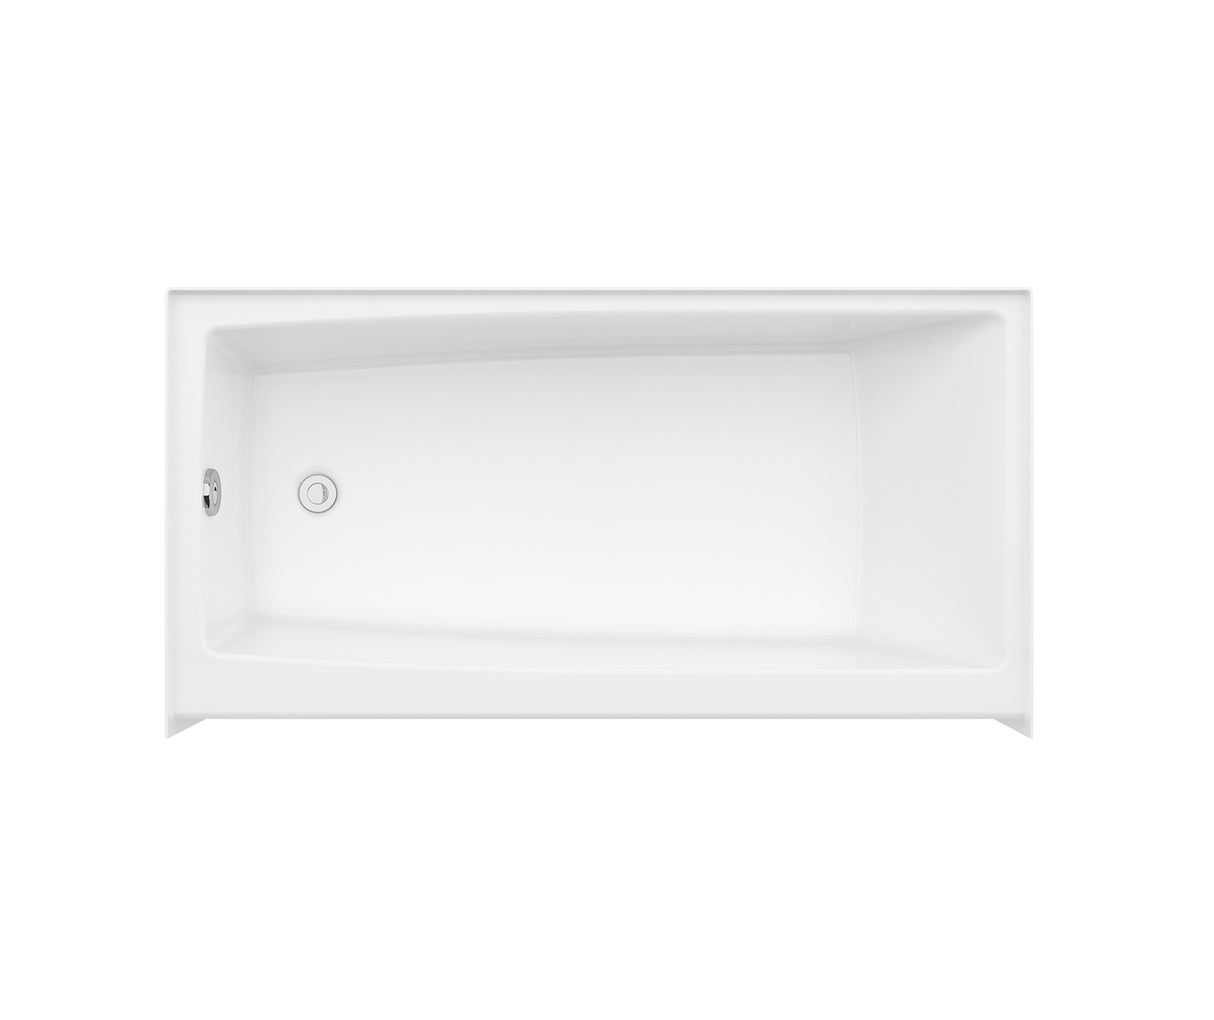 MAAX 106883-R-000-007 Jaxi 6032 AcrylX Alcove Right-Hand Drain Bathtub in Biscuit